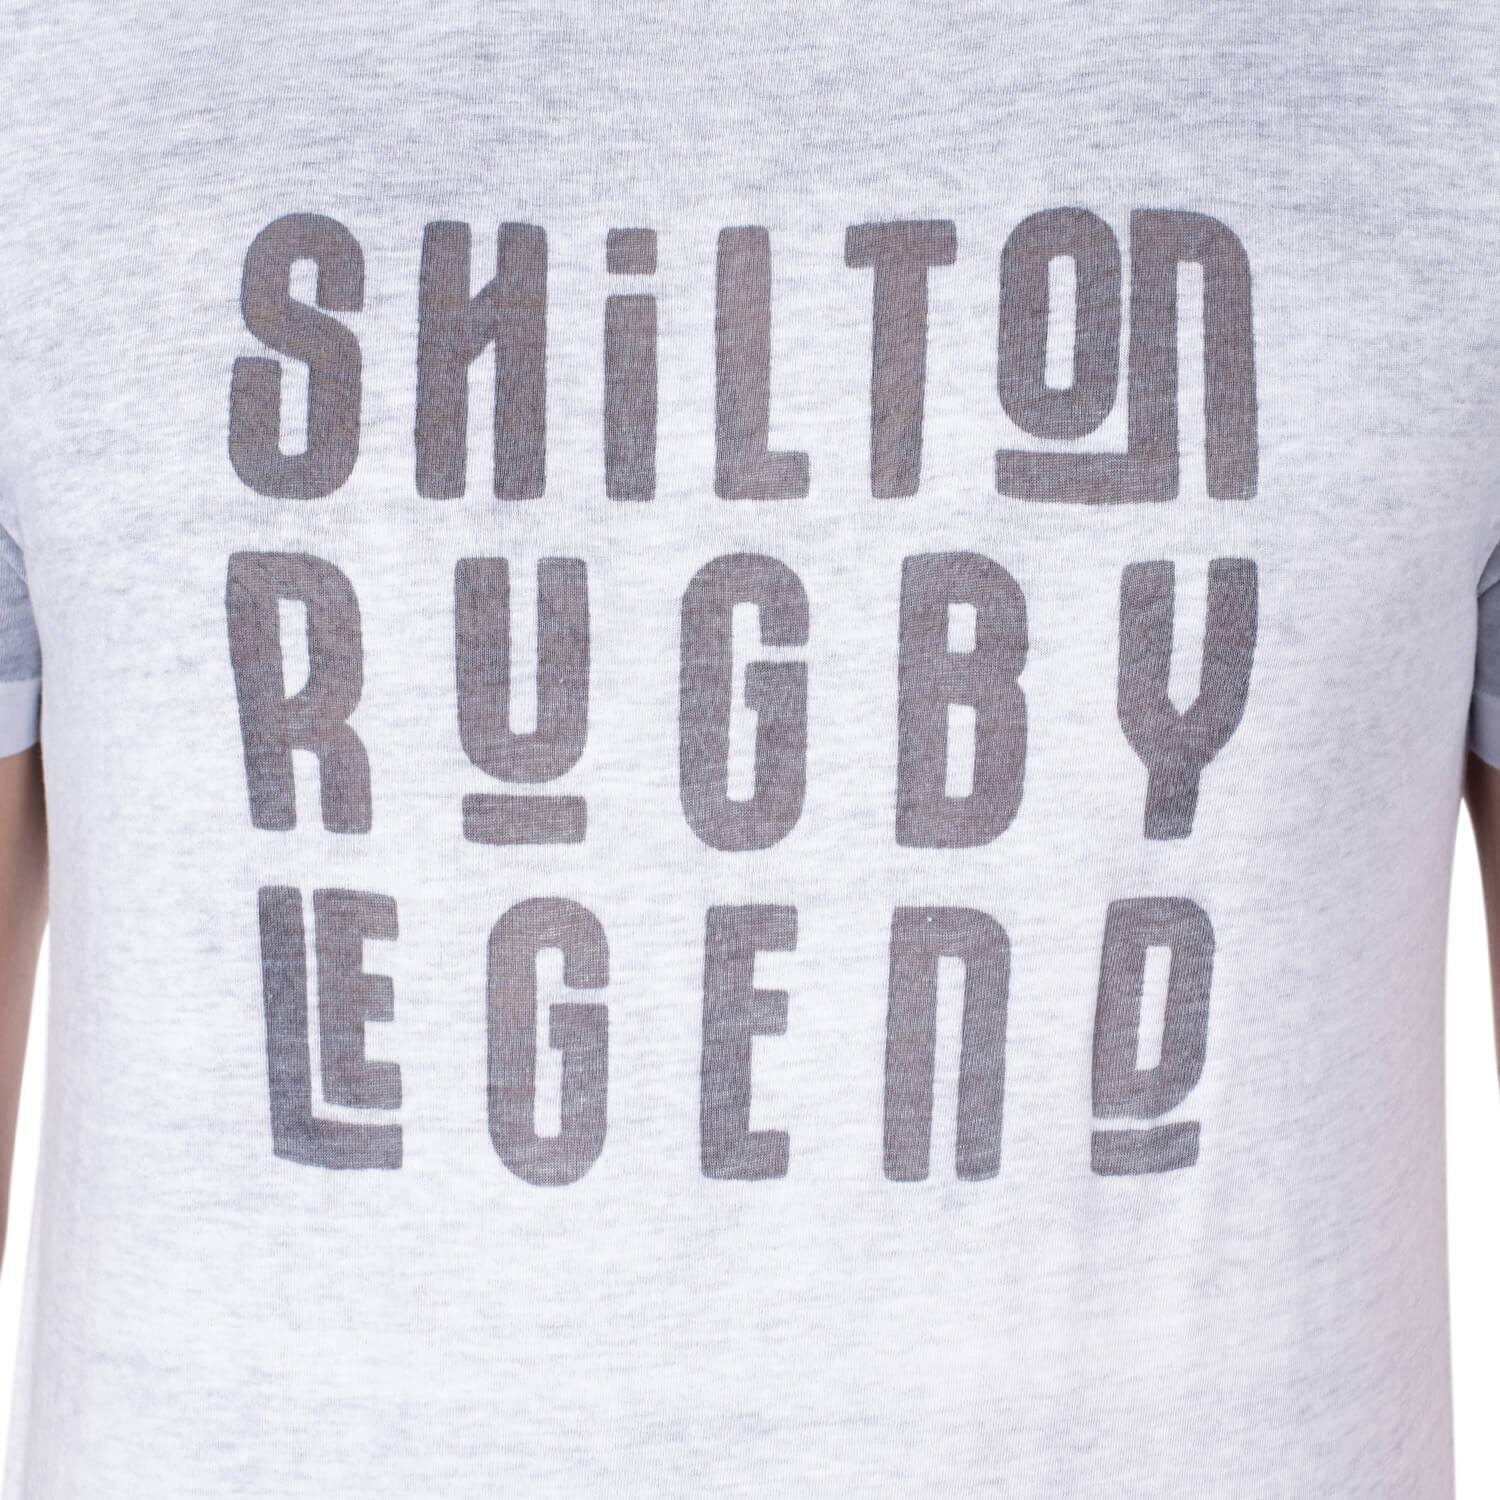 T Shirt Vintage Rugby Navy